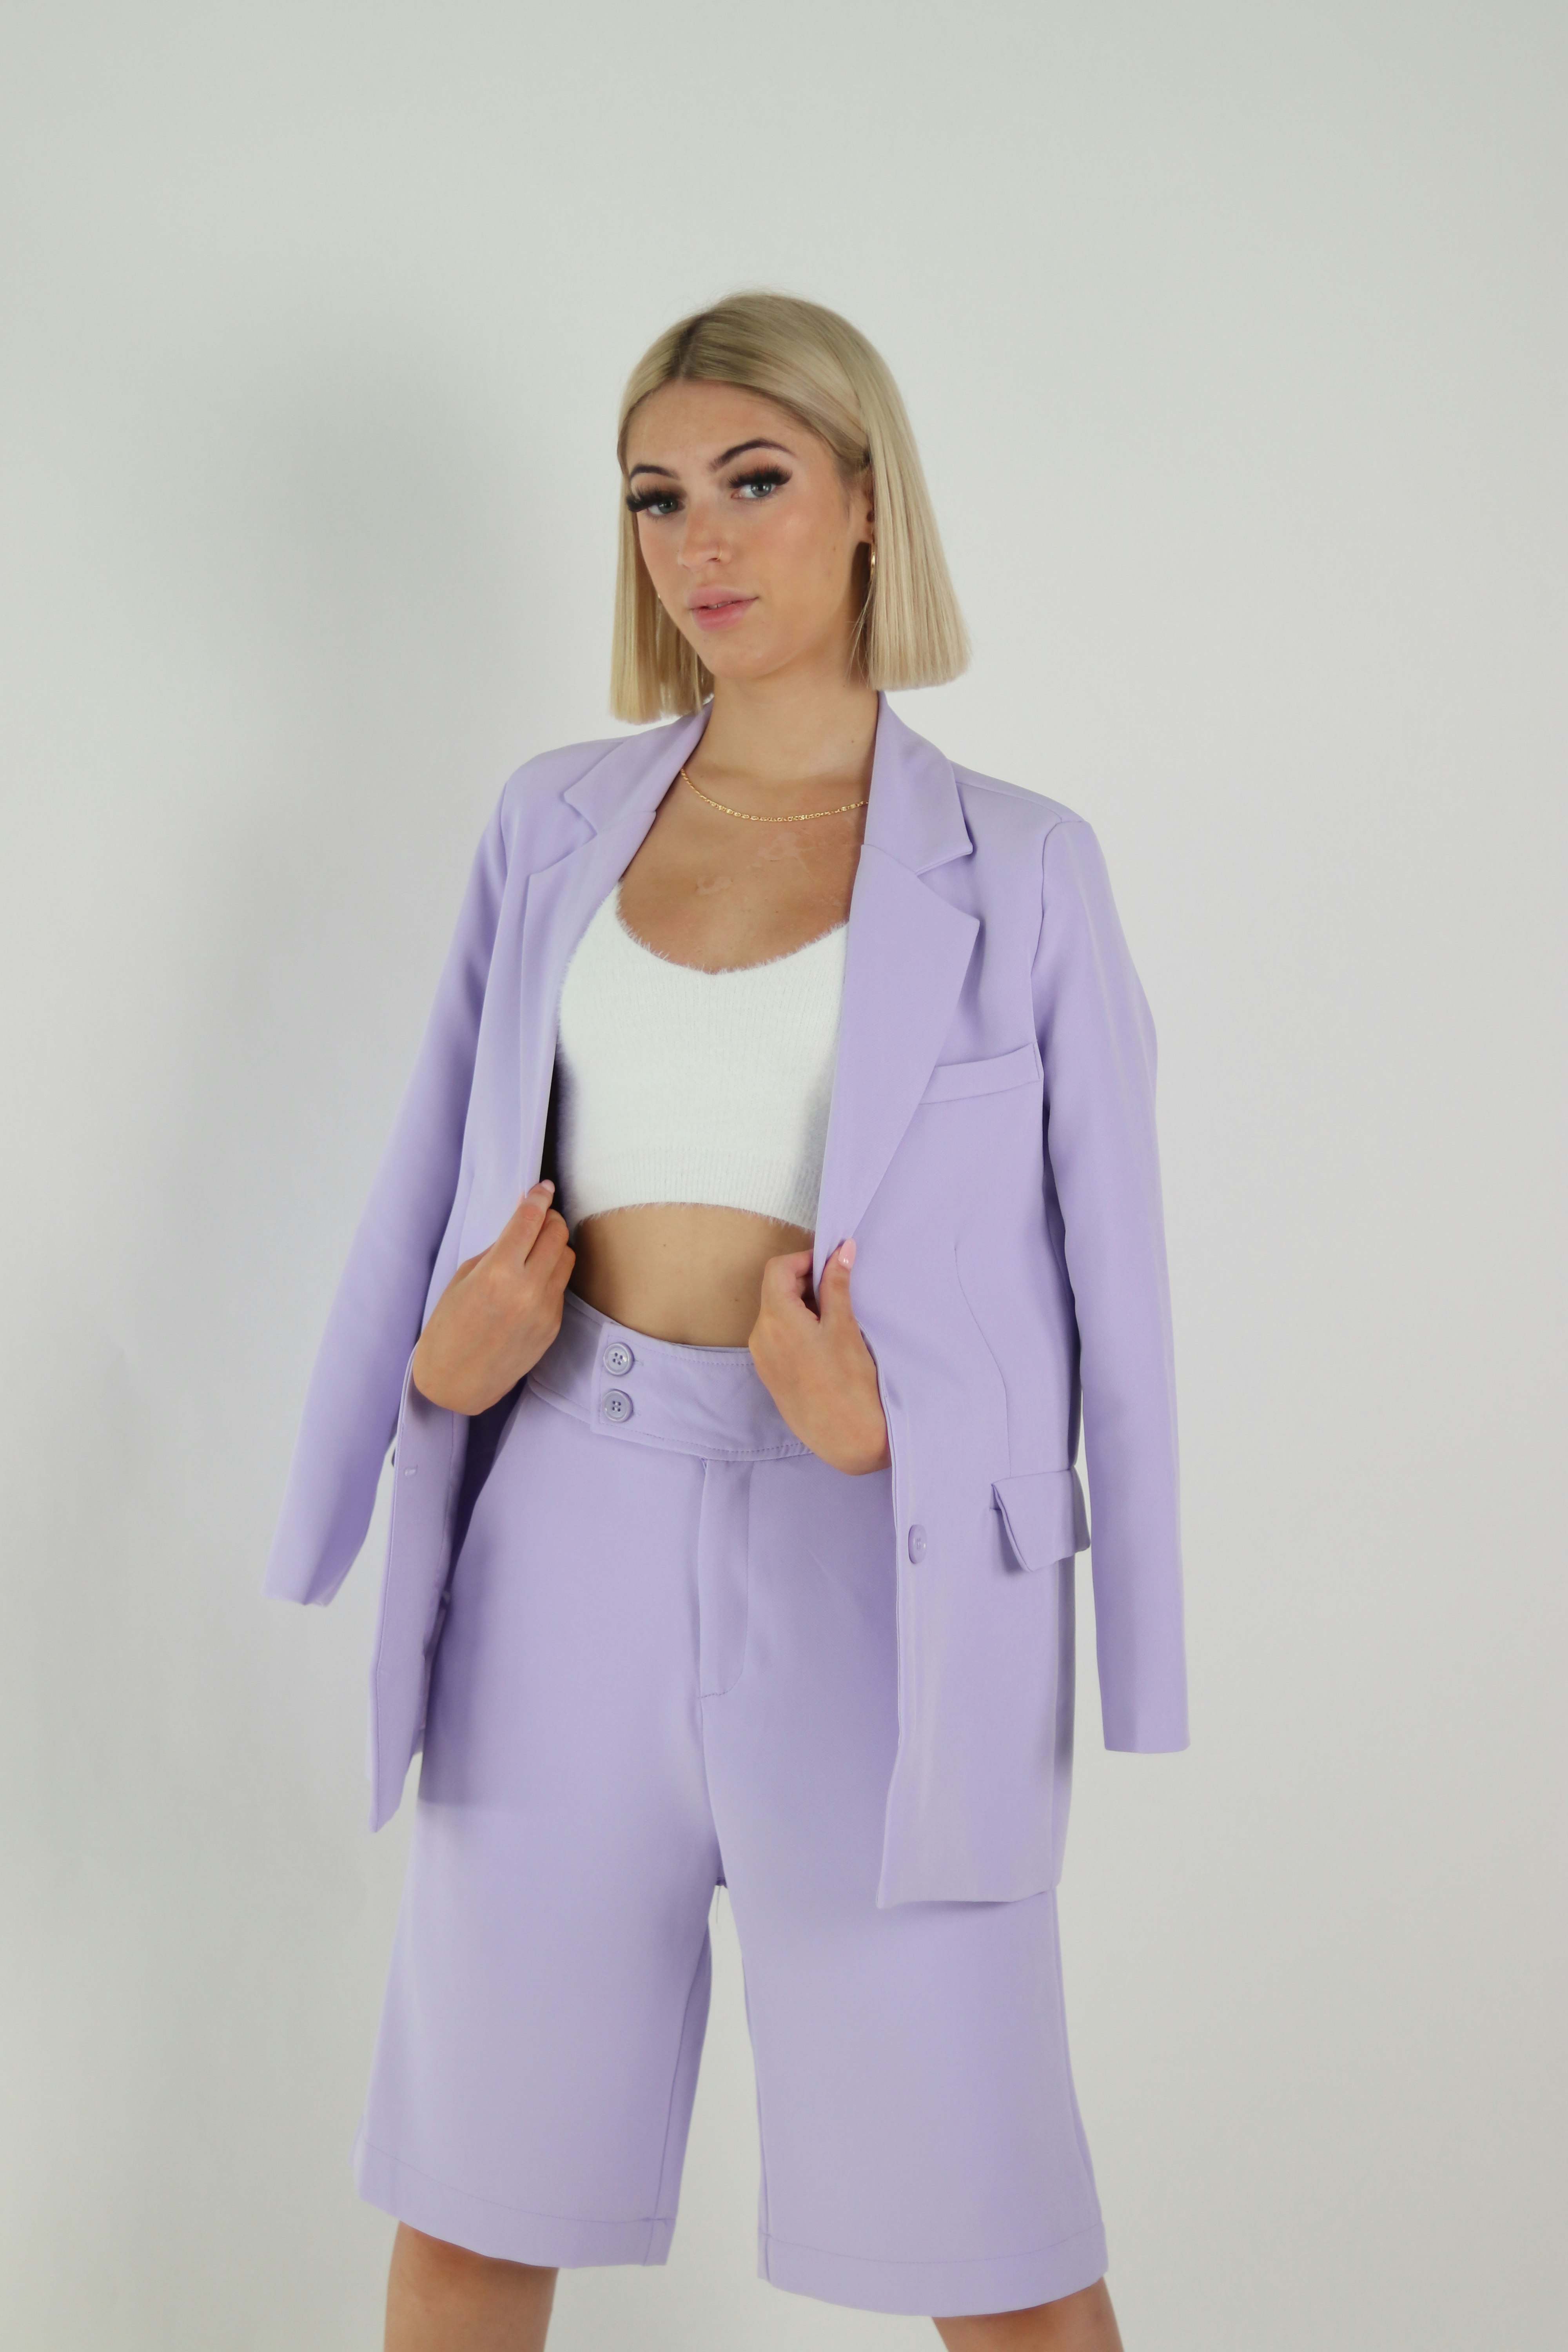 woman in white crop top and pink blazer